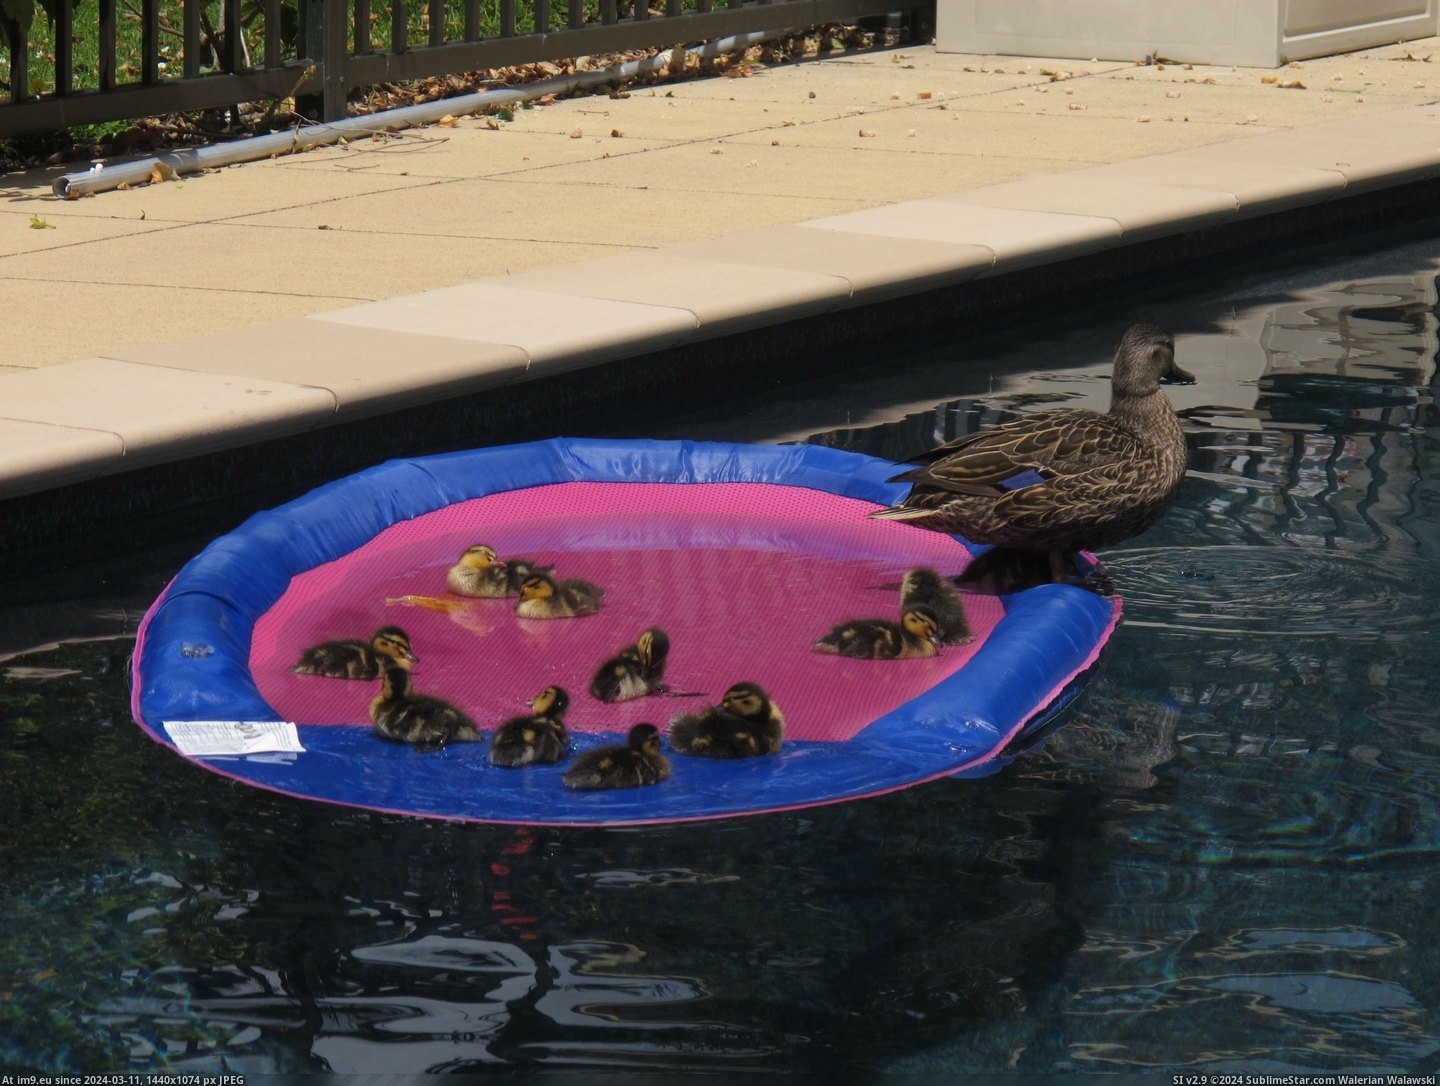 #Life #Out #Pool #Raft #Ducklings #Our #Too #Jump [Aww] We found ducklings in our pool. Were too little to jump out, so we sent in a life raft. Pic. (Image of album My r/AWW favs))